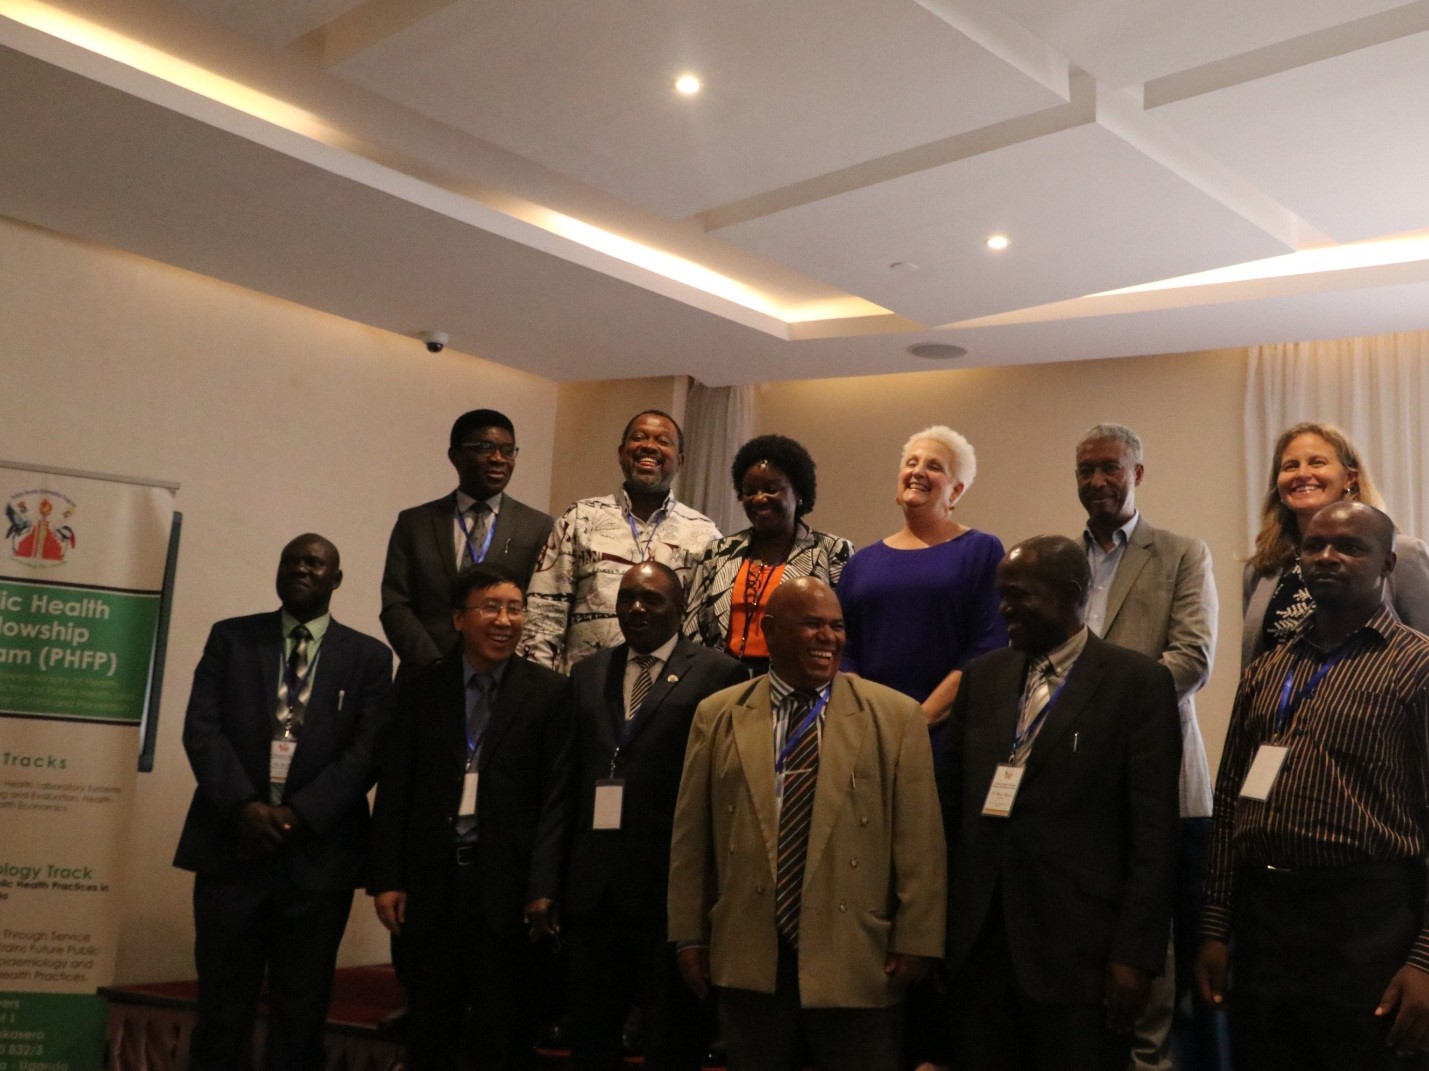 Dr. Patrick Tusiime, second left top row, the Commissioner Health Services and the Program Co-Director of the Public Health Fellowship Program. He was posing with the dignitaries at the graduation and other mentors of the Fellows that attended the function.